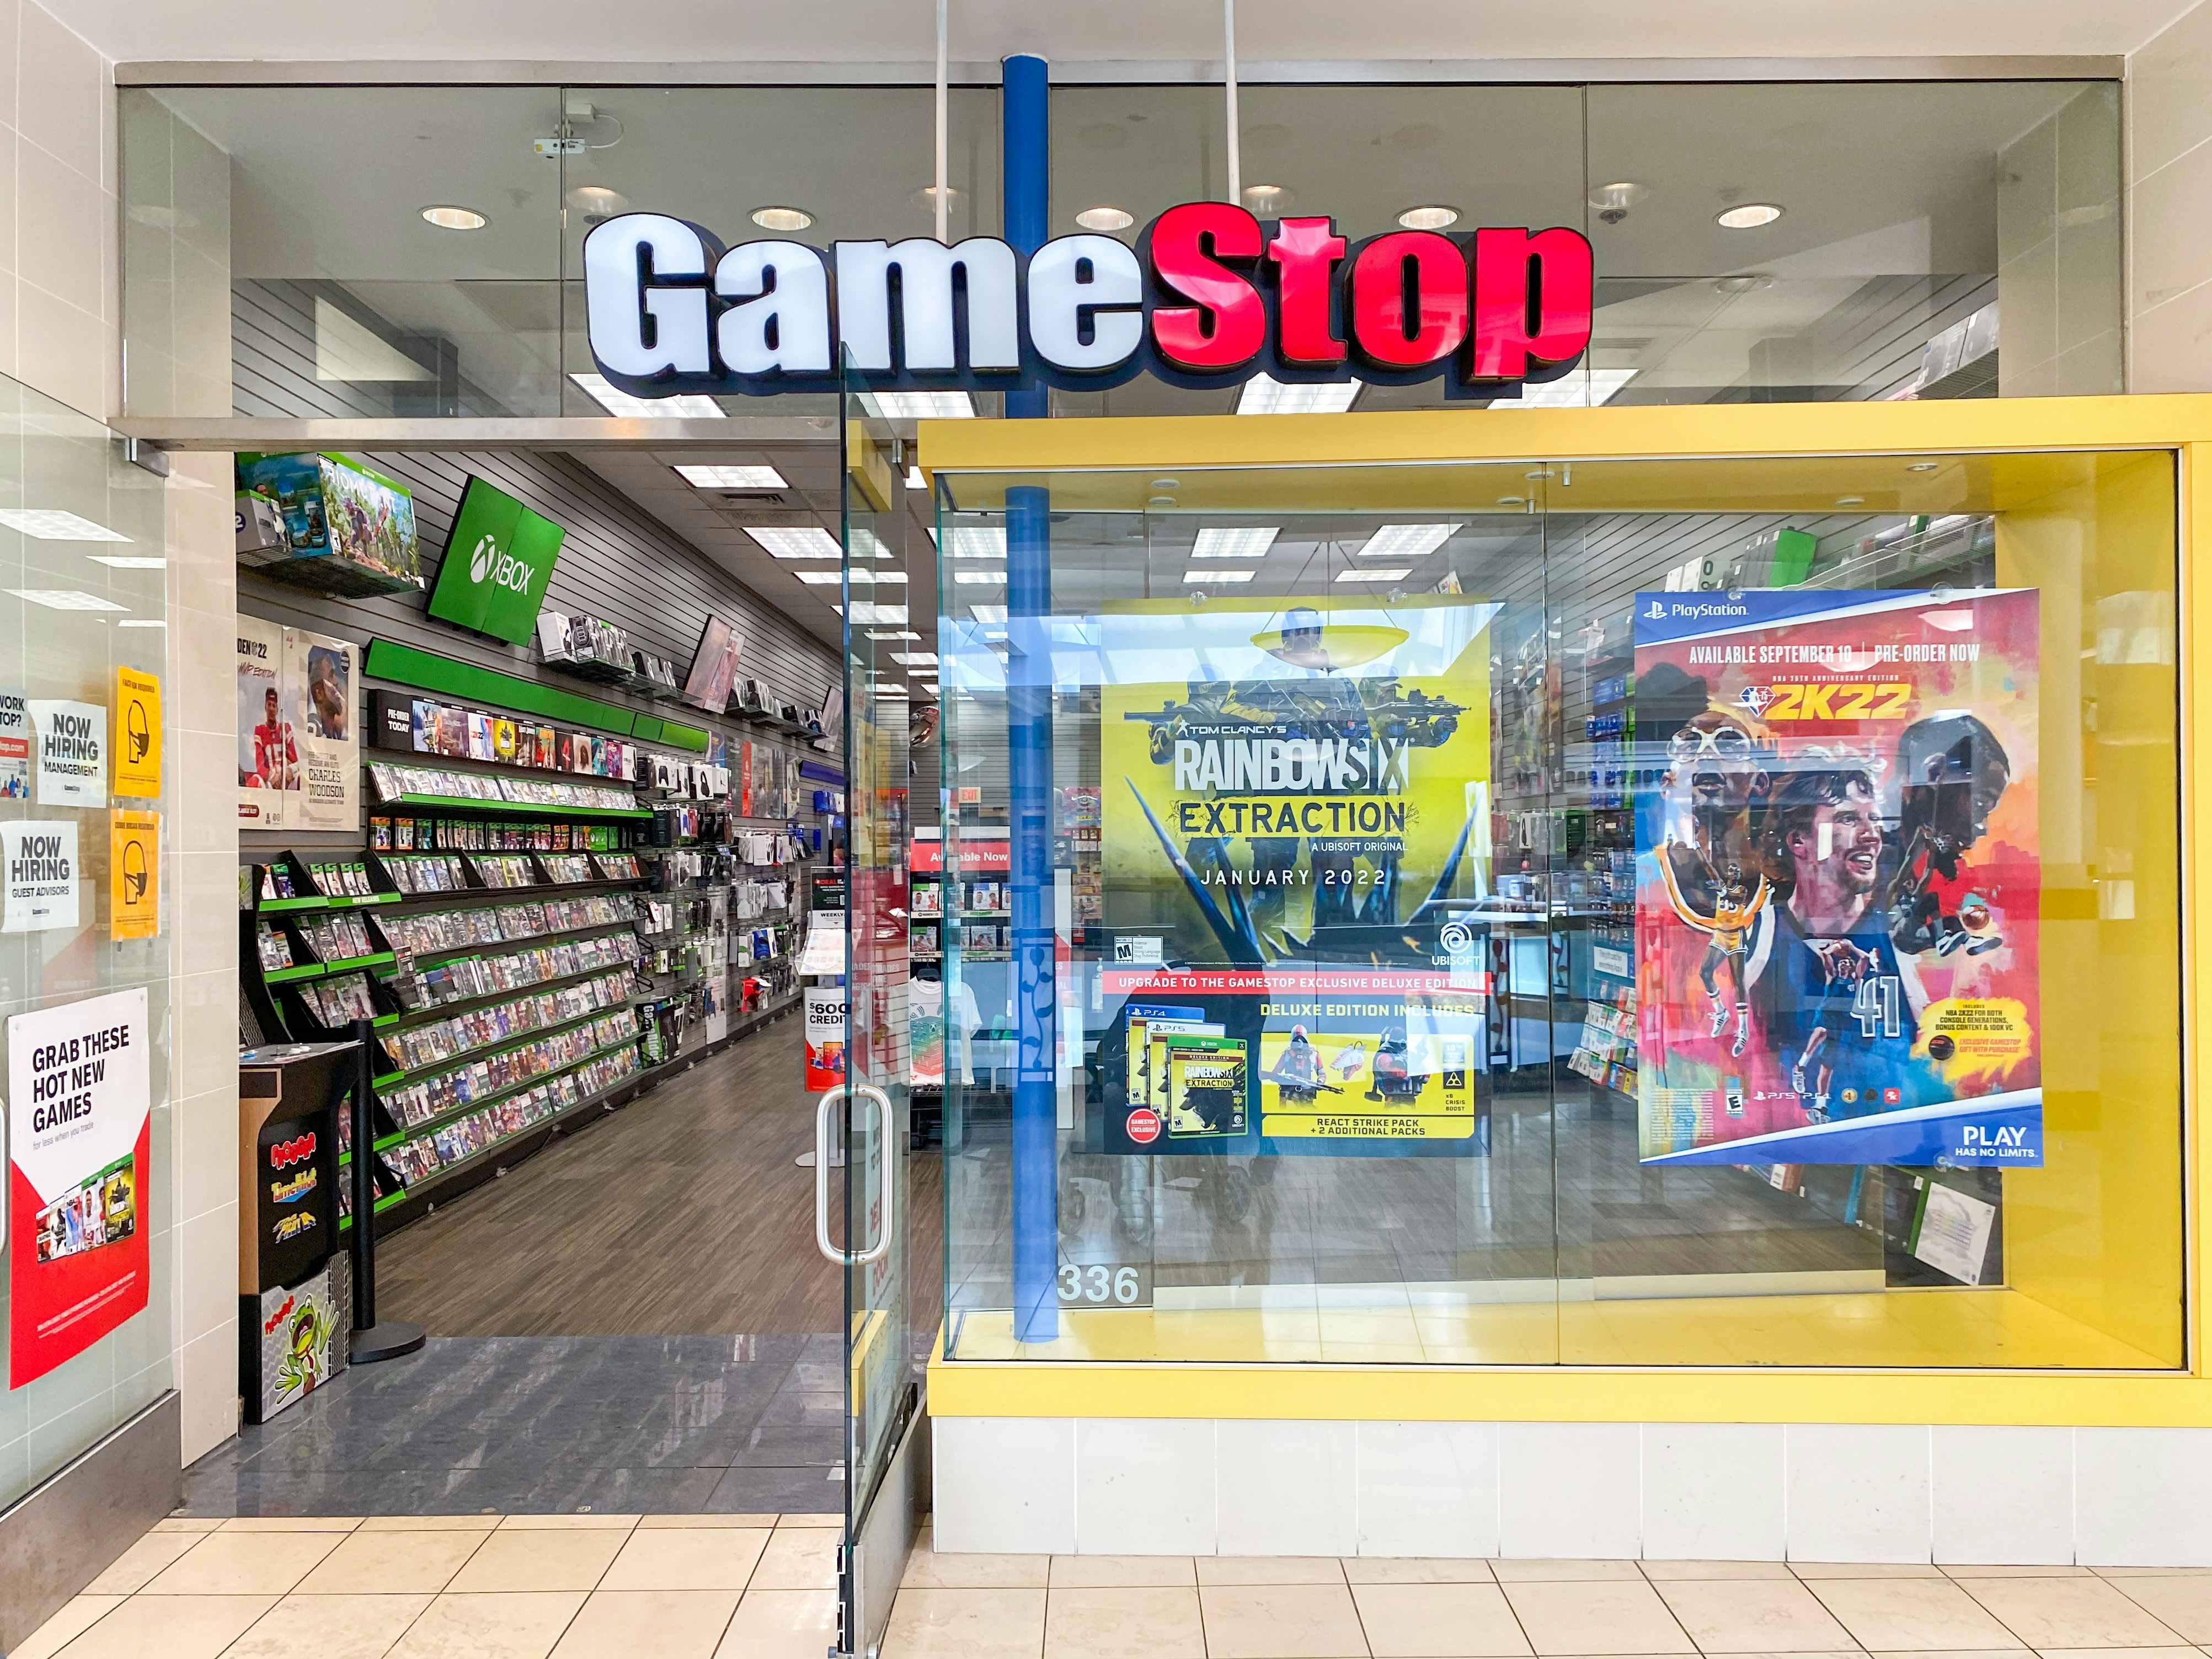 The entrance to a GameStop store.